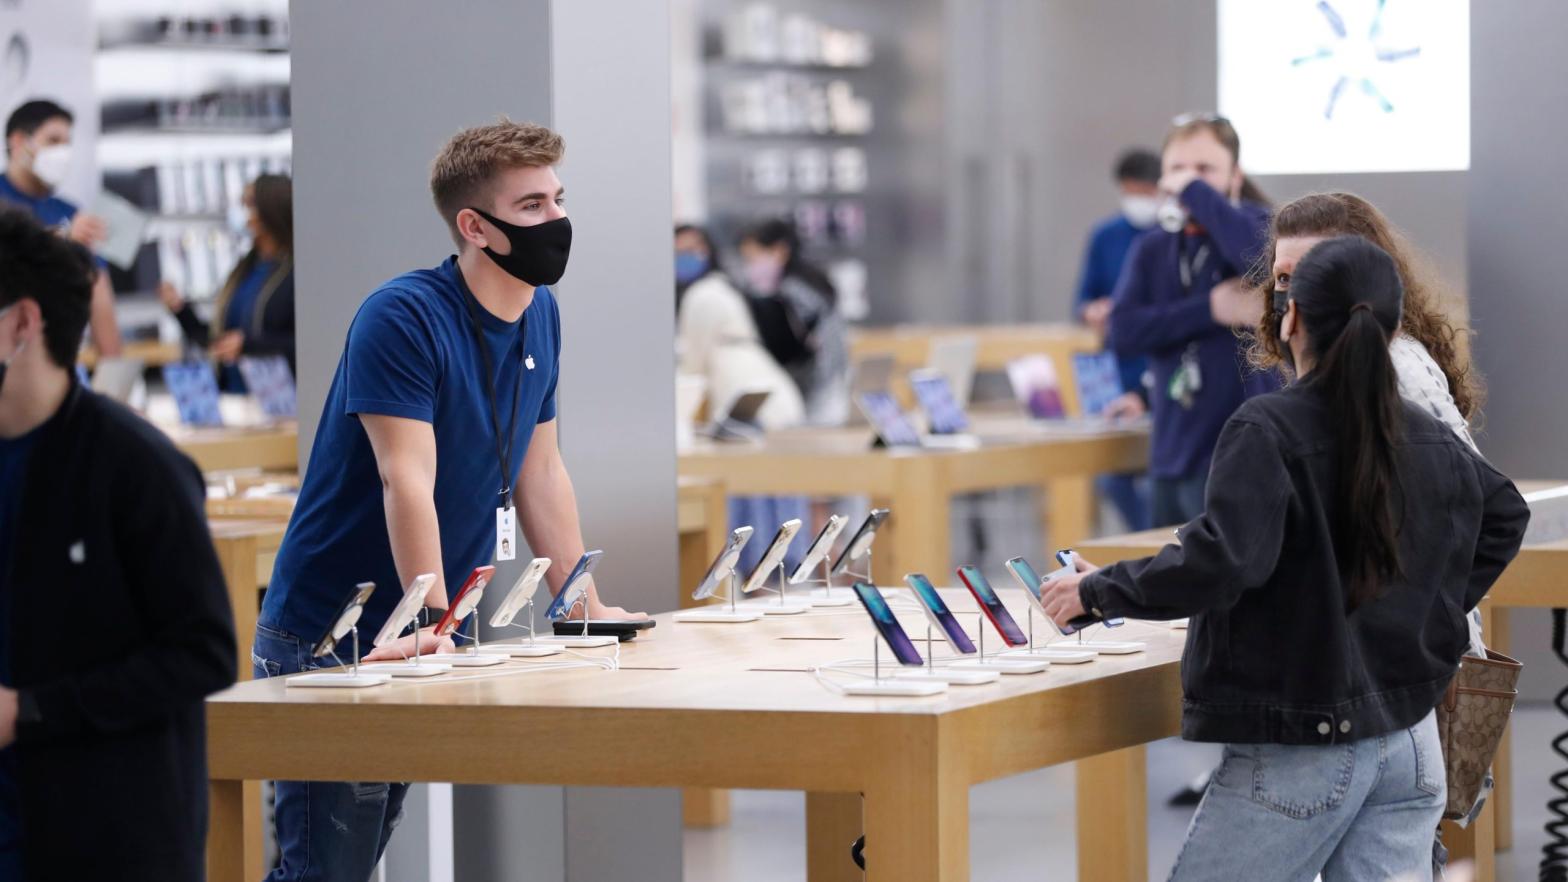 An Apple store employee wearing a mask at a store in Tampa, Florida on Black Friday on Nov. 26, 2021. (Photo: Octavio Jones, Getty Images)